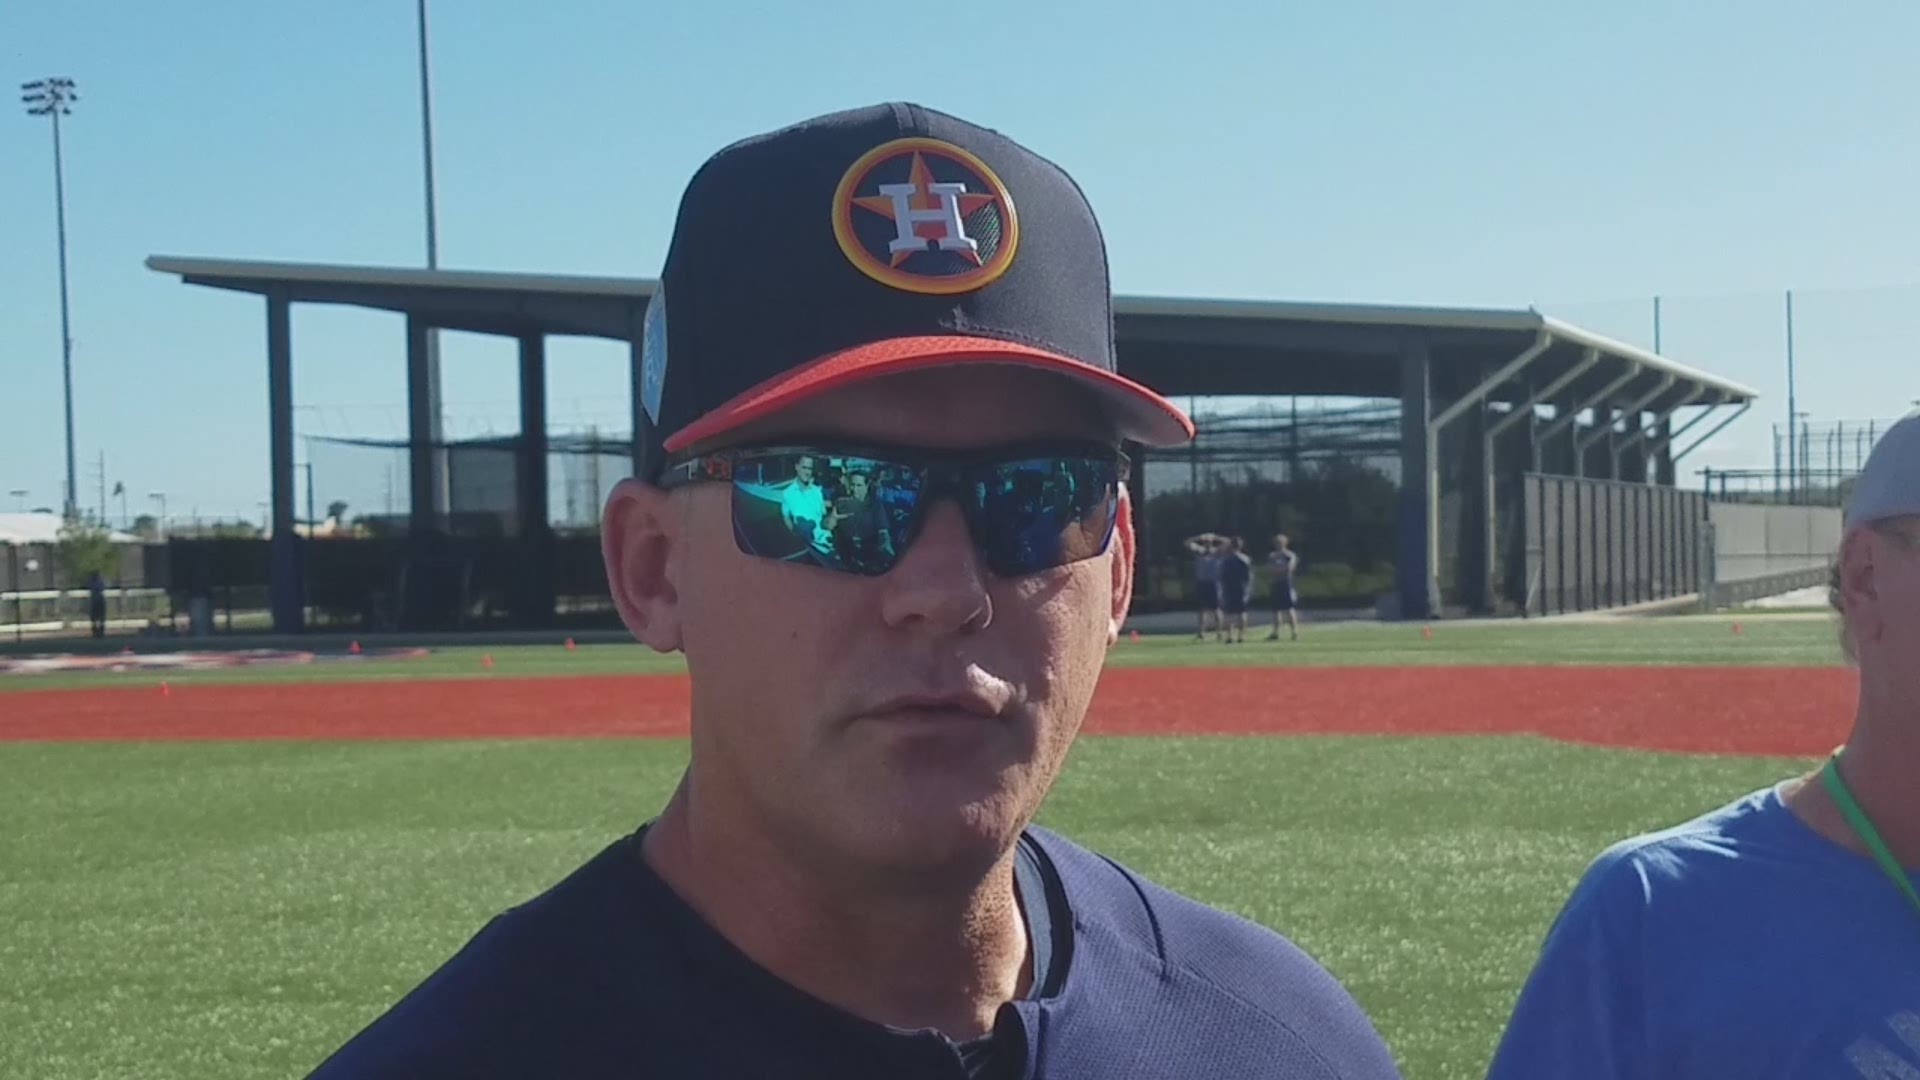 Astros Manager A.J. Hinch spoke about the tragic Parkland shooting before Thursday's practice. The shooting occurred just an hour south of the team's facility in West Palm Beach.